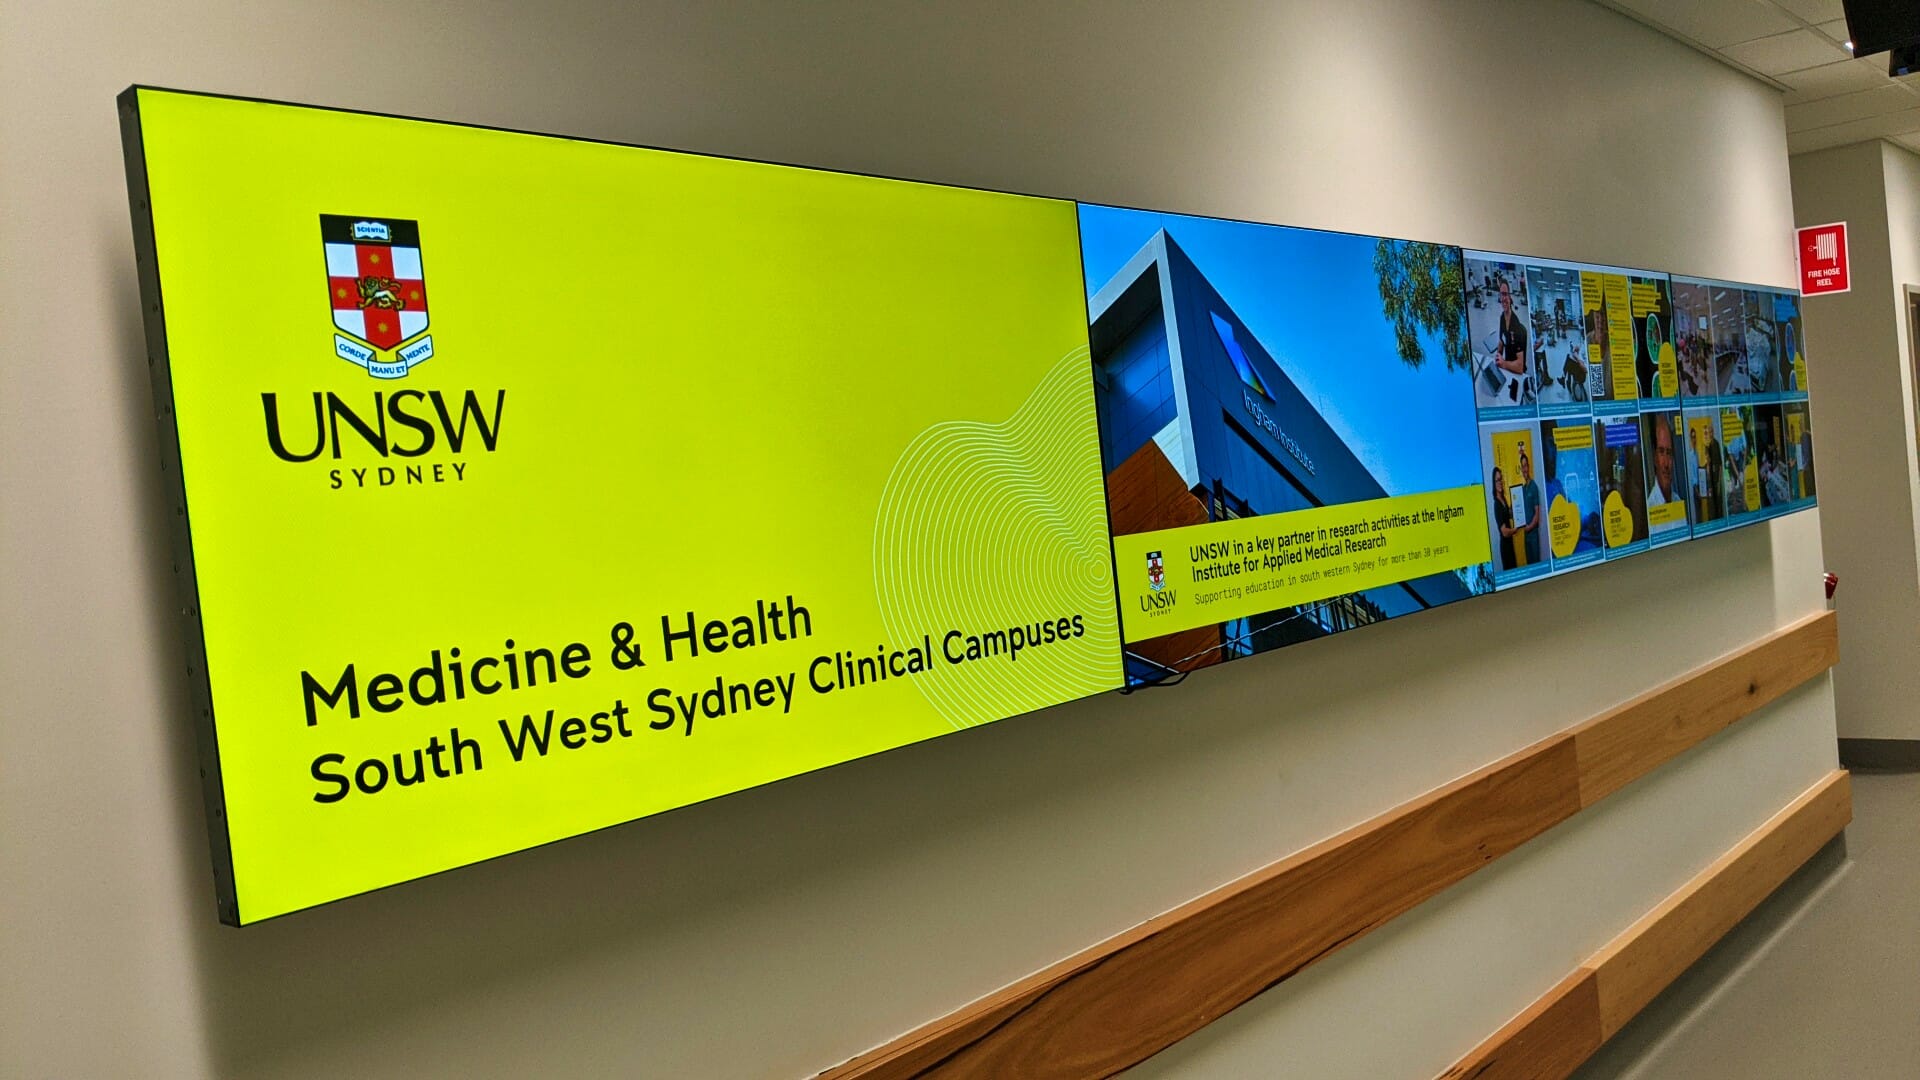 Video Wall – UNSW Medicine & Health South West Sydney Video Wall Upgrade